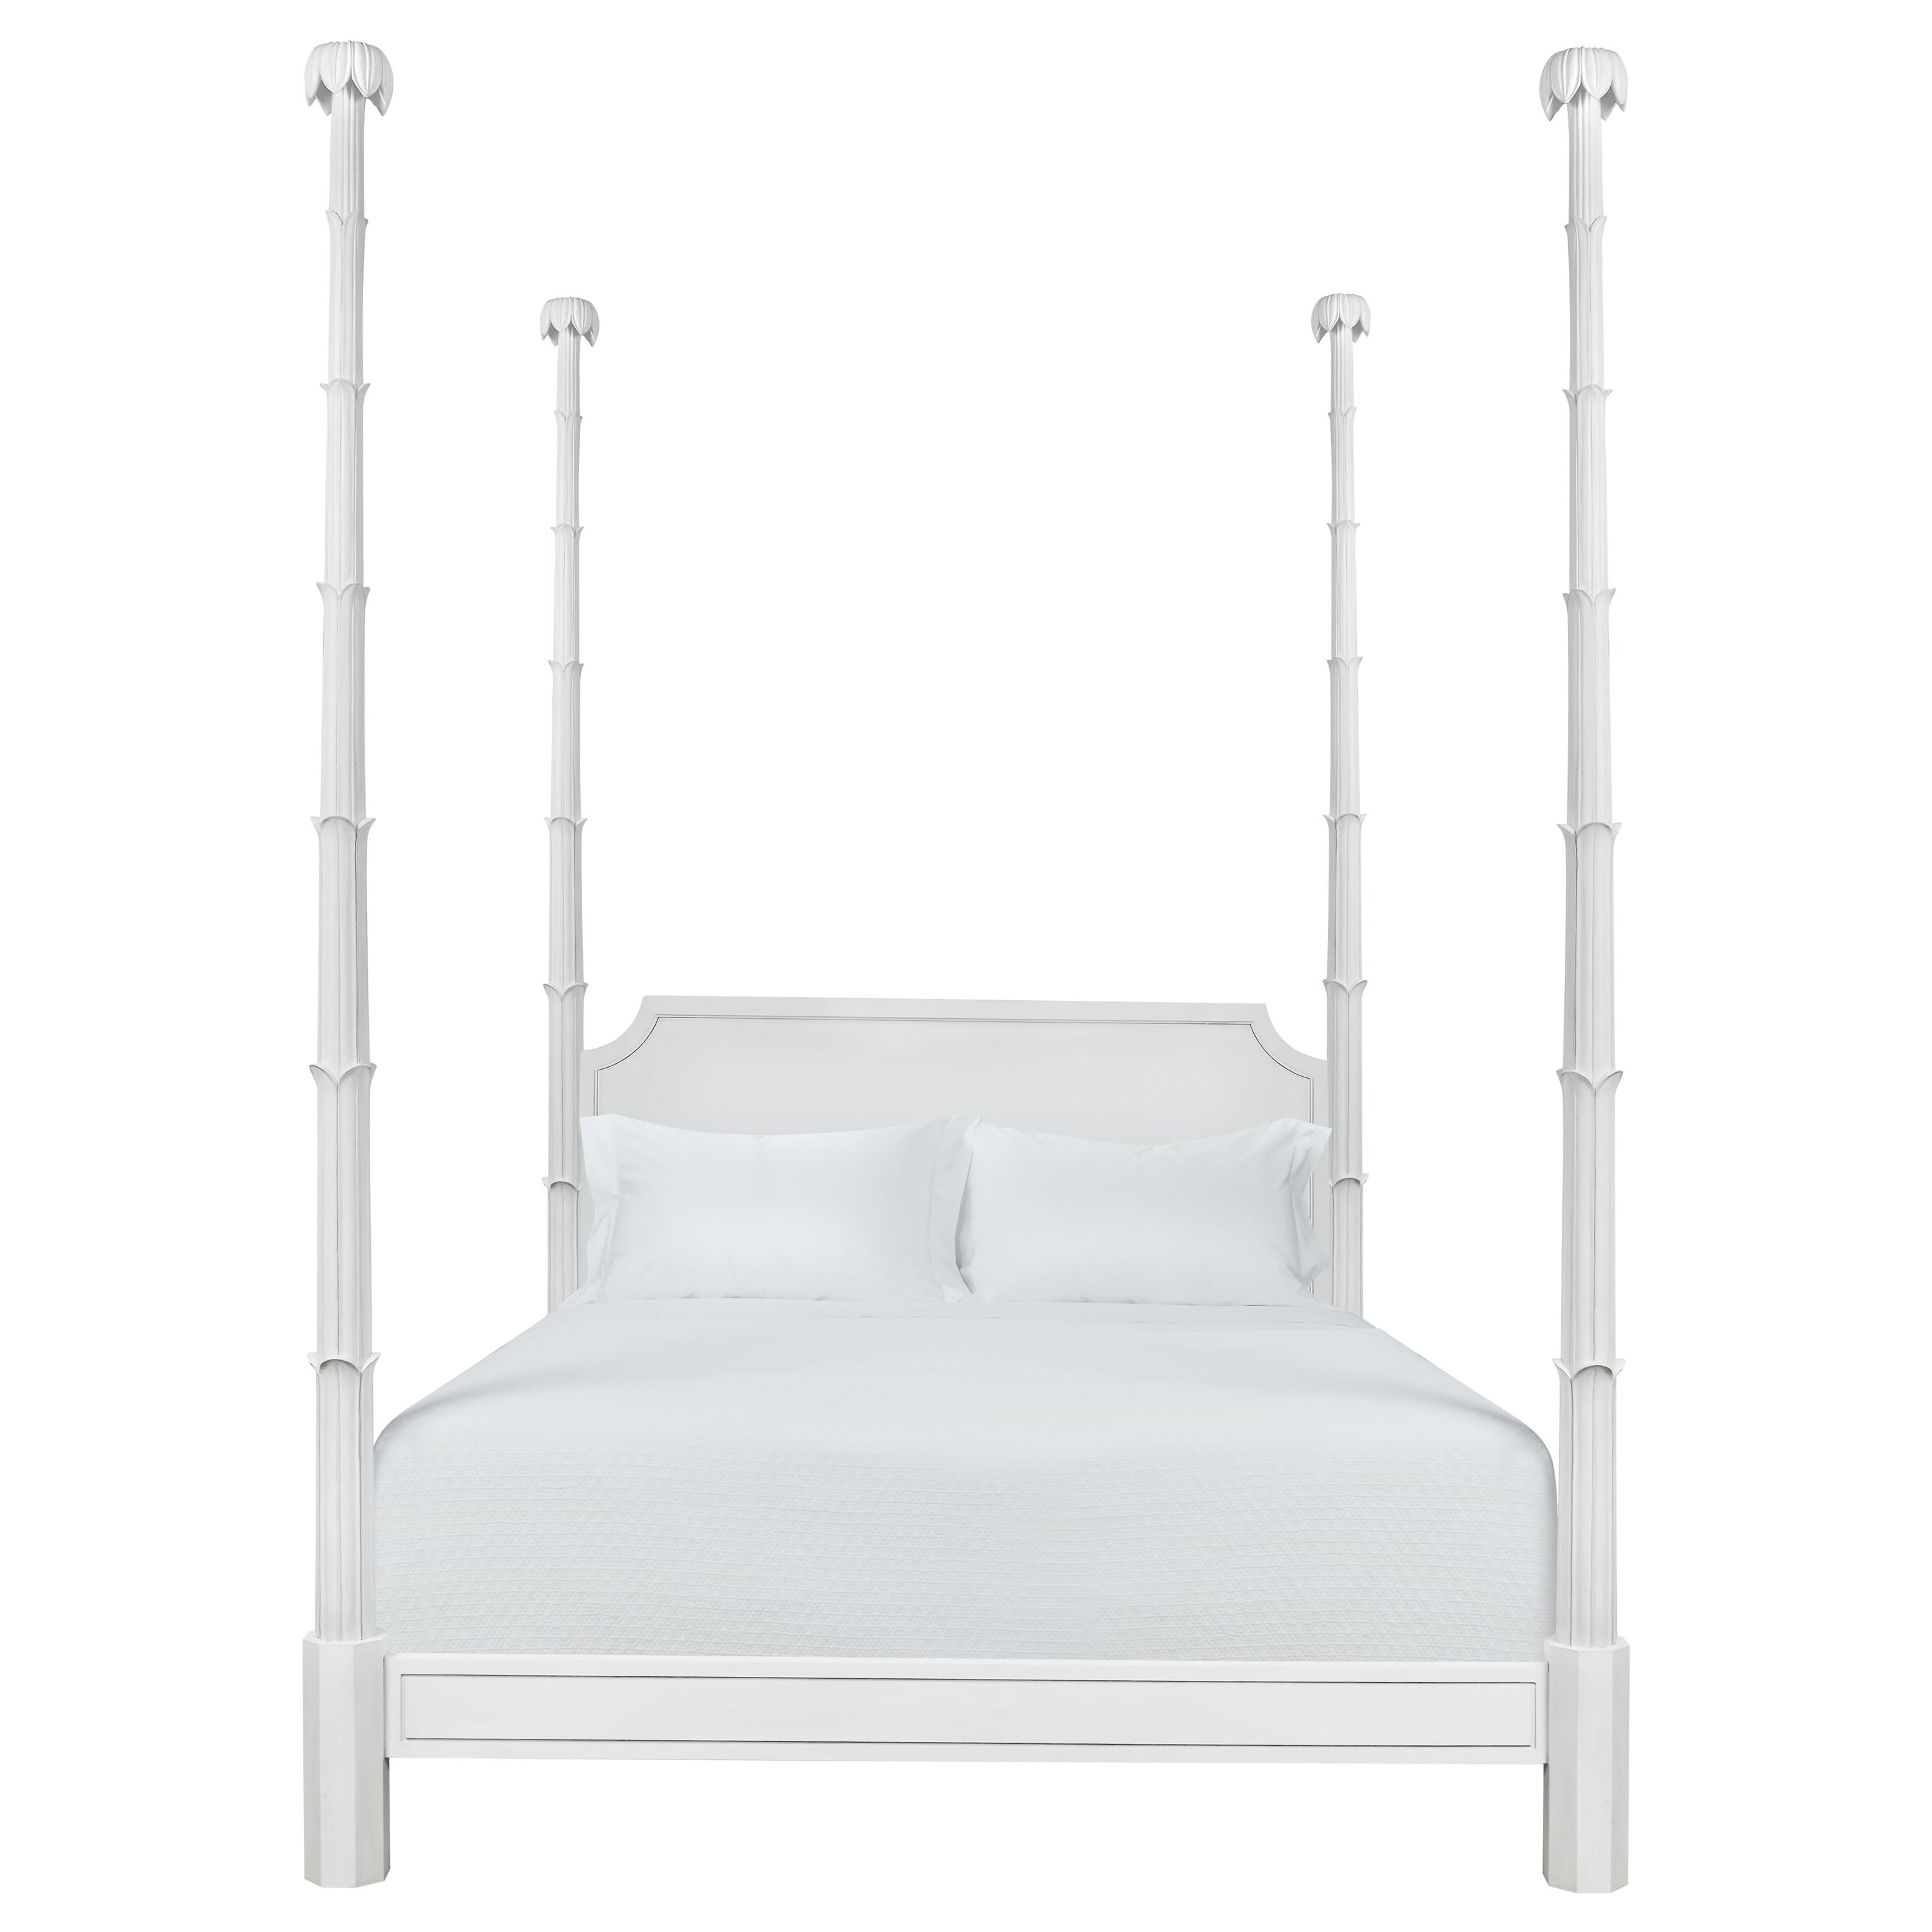 Bunny Williams Home Keller Bed, King For Sale